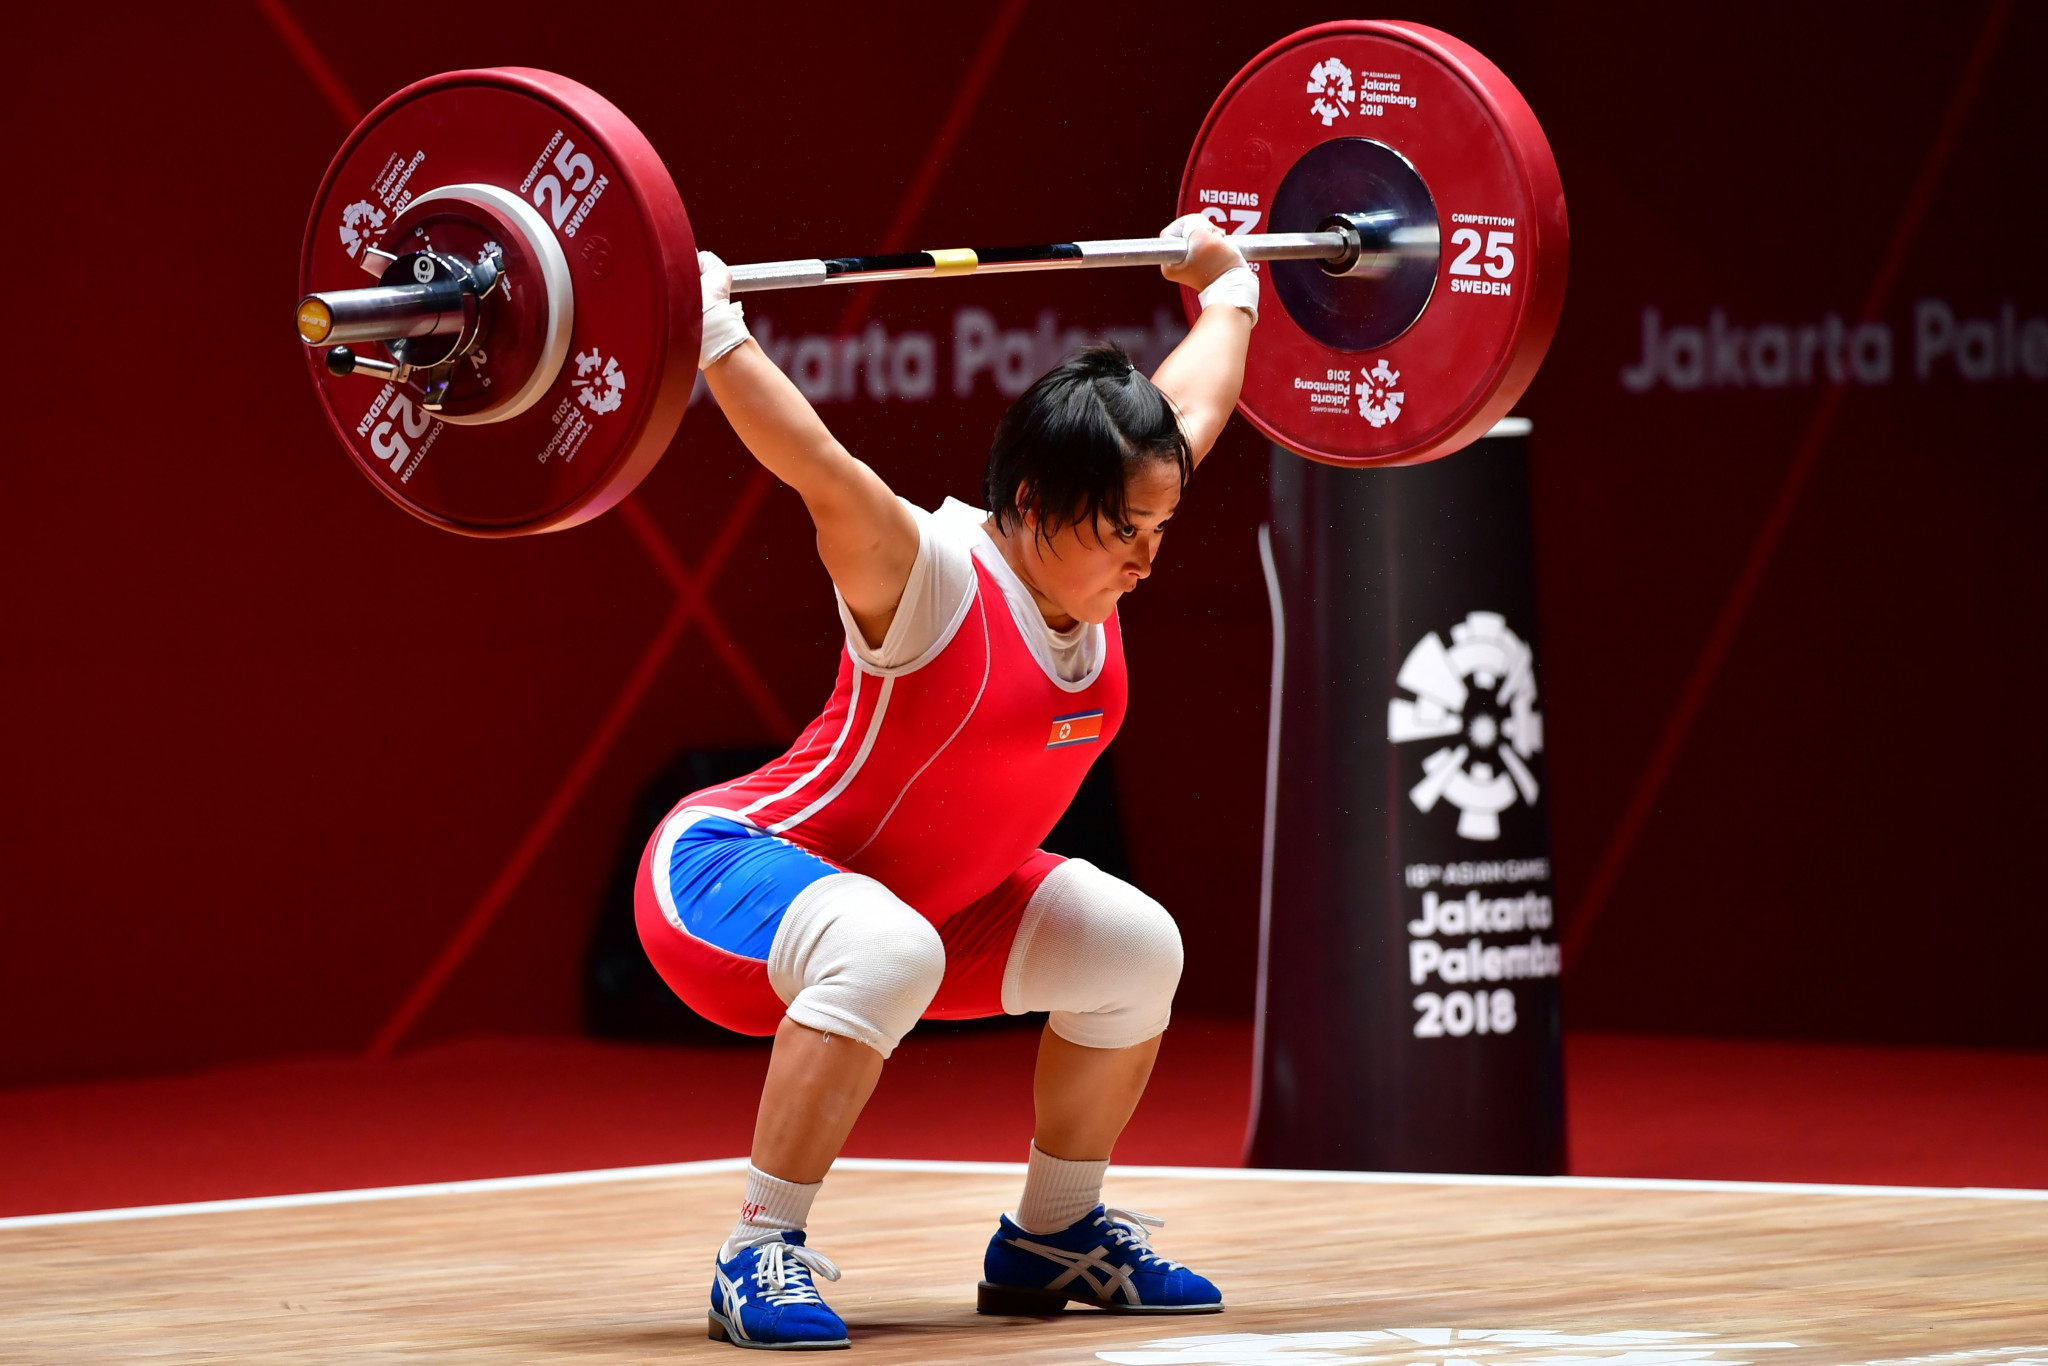 USA Weightlifting announce combine series to find new talent